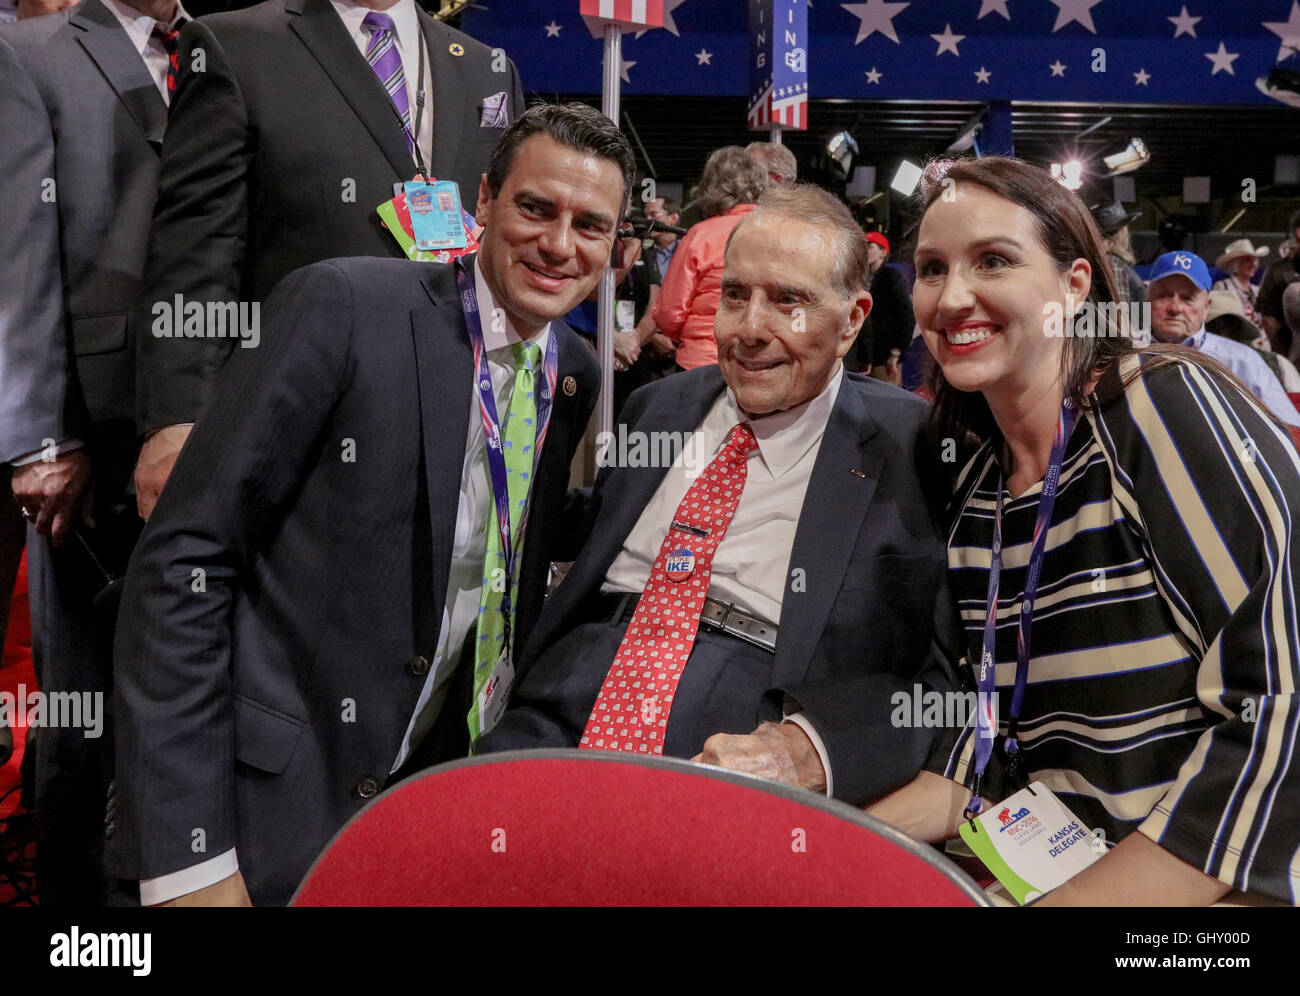 Cleveland, Ohio, USA, 19th July, 2016 Senator Robert Dole visits with the Kansas delegation  Congressman Tim Yoder and his wife Brooke pose with Senator Dole. Brooke kisses the Senator.  Special To the Capitol Journa By Mark Reinstein. Stock Photo